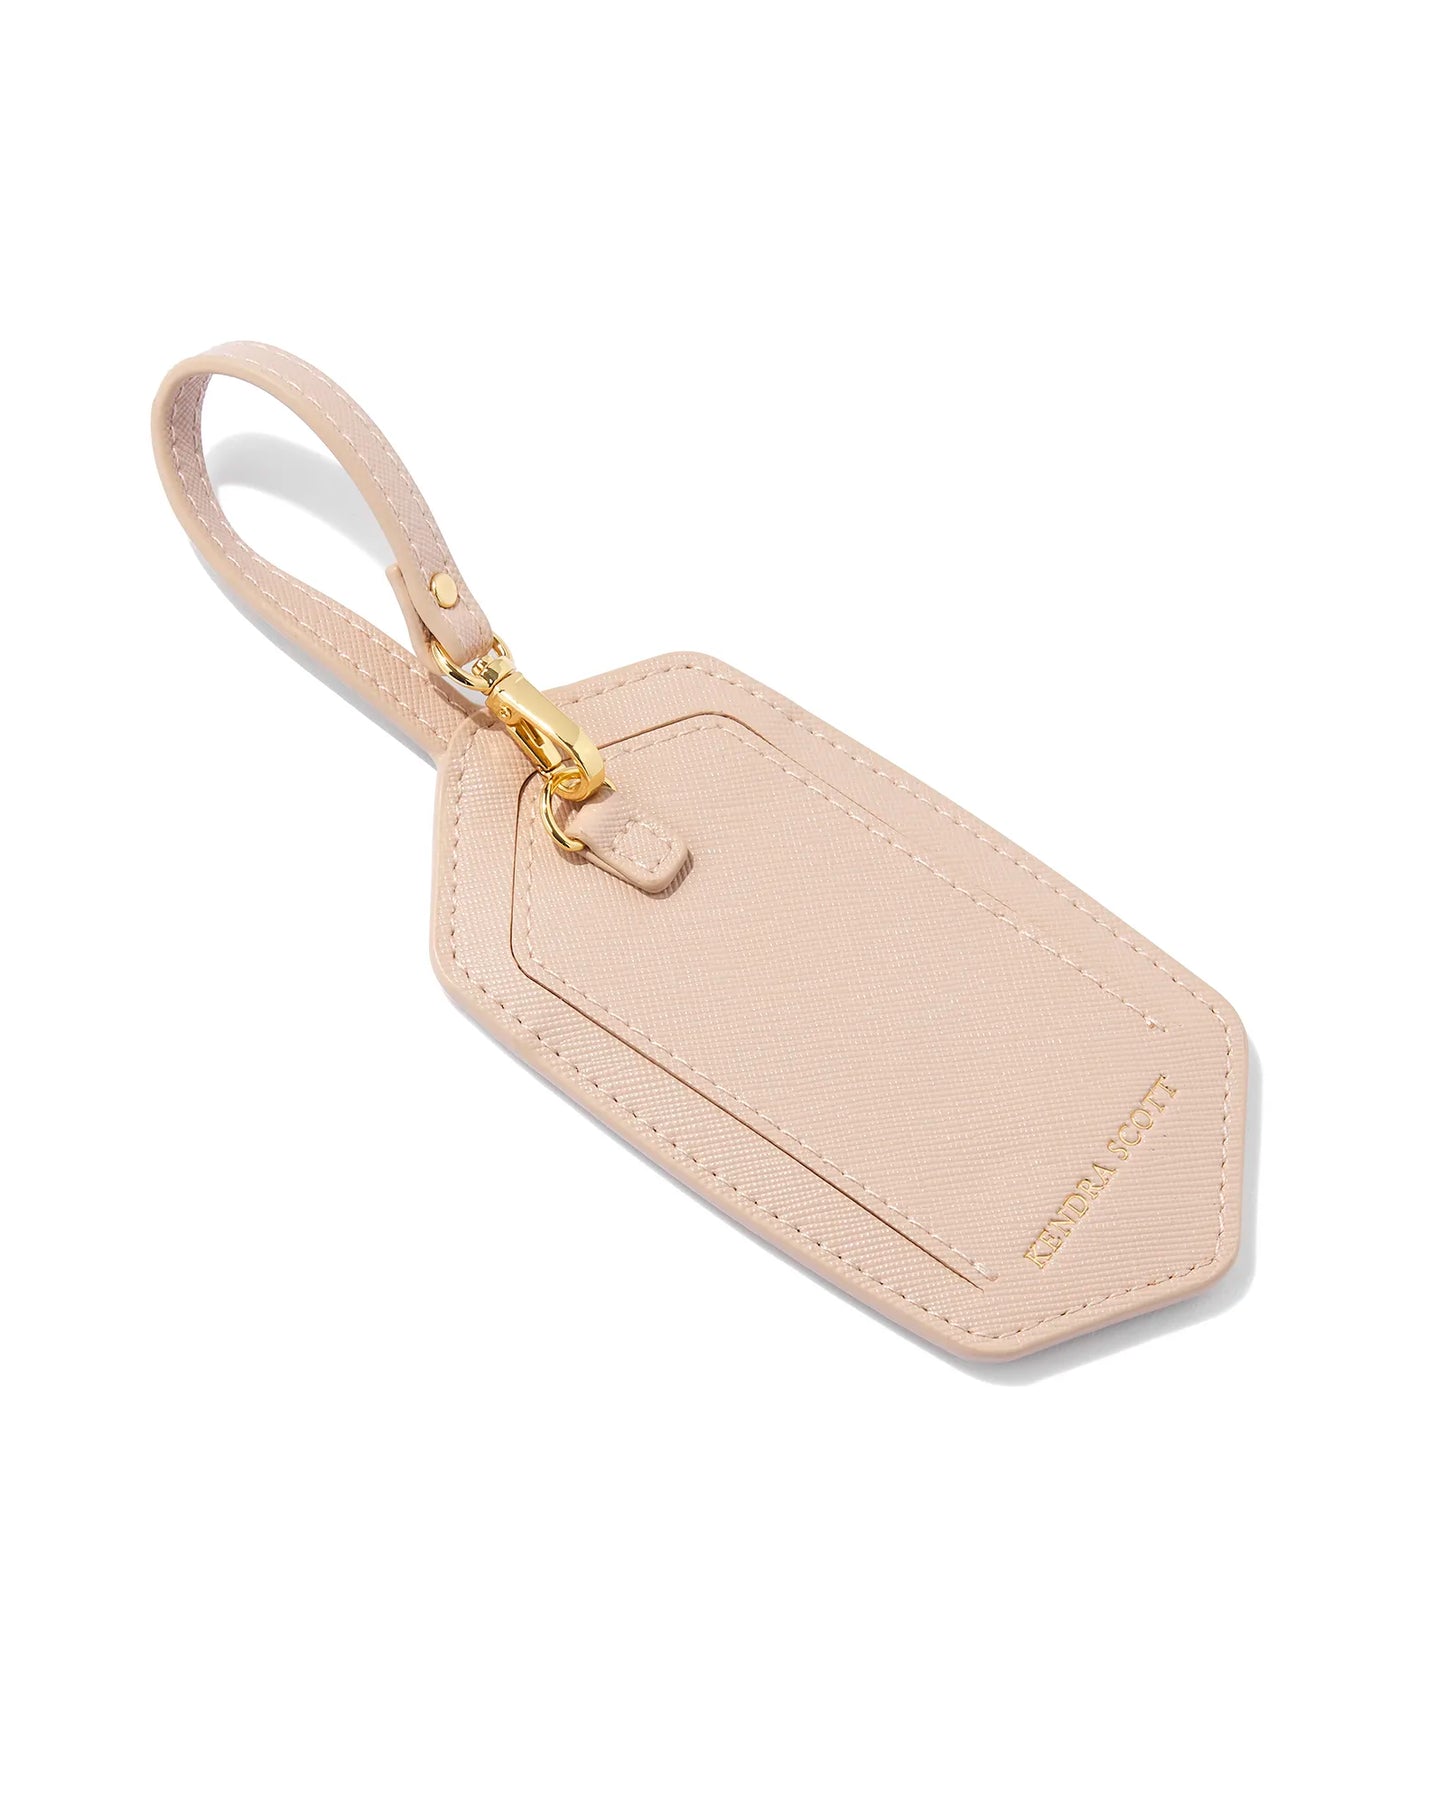 light pink luggage tag 2.5" X 5.11" (10.4" with strap)